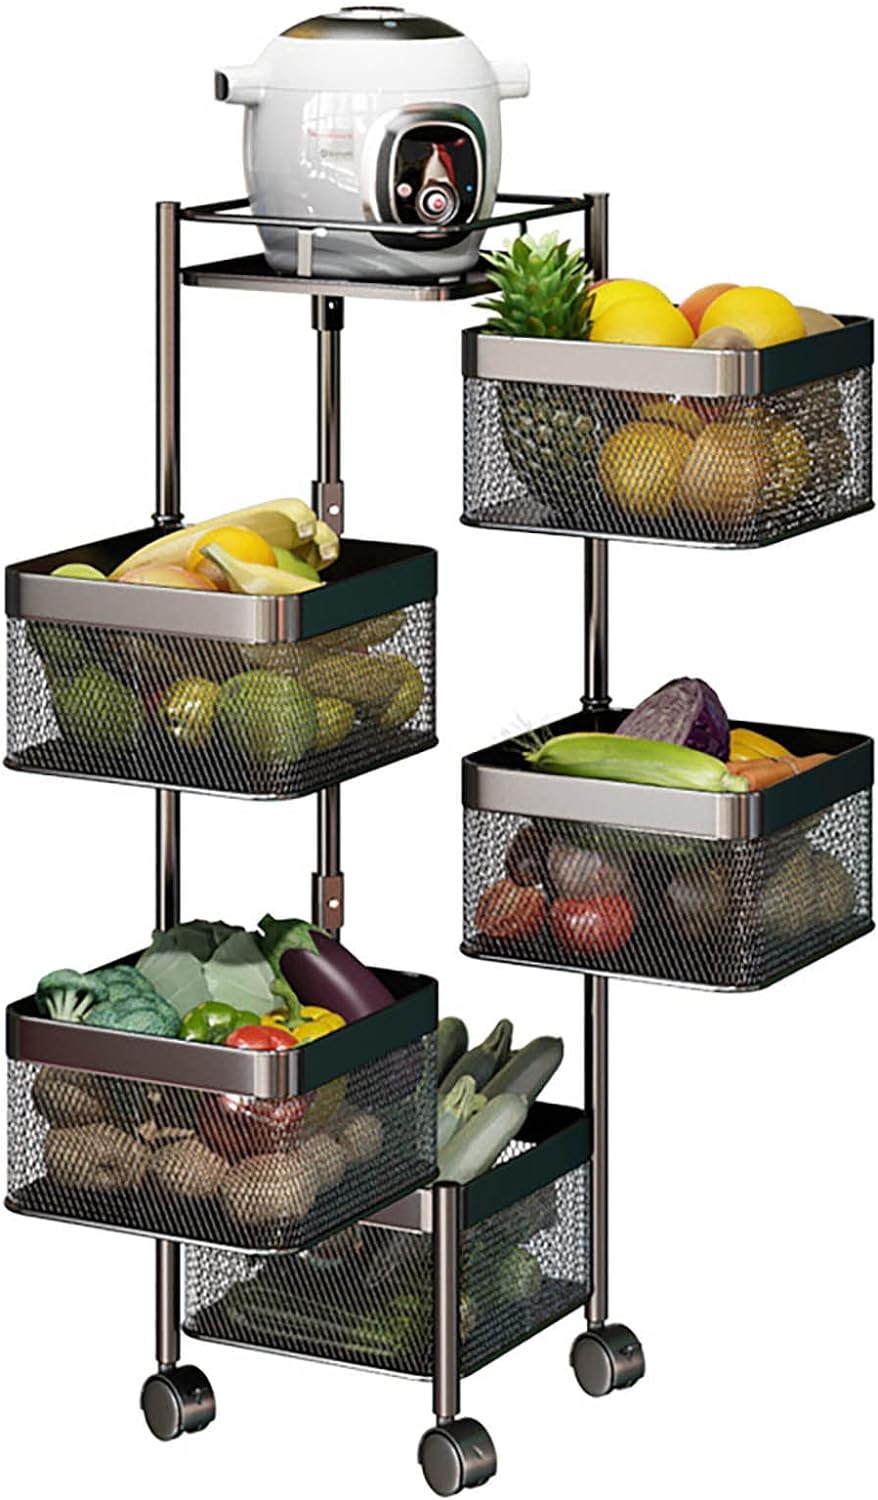 5 Tier Rotating Fruit and Vegetable Storage, 360° Square Rotating Storage Rack for Kitchen, Multifunctional Household Kitchen Vegetable Storage Rack